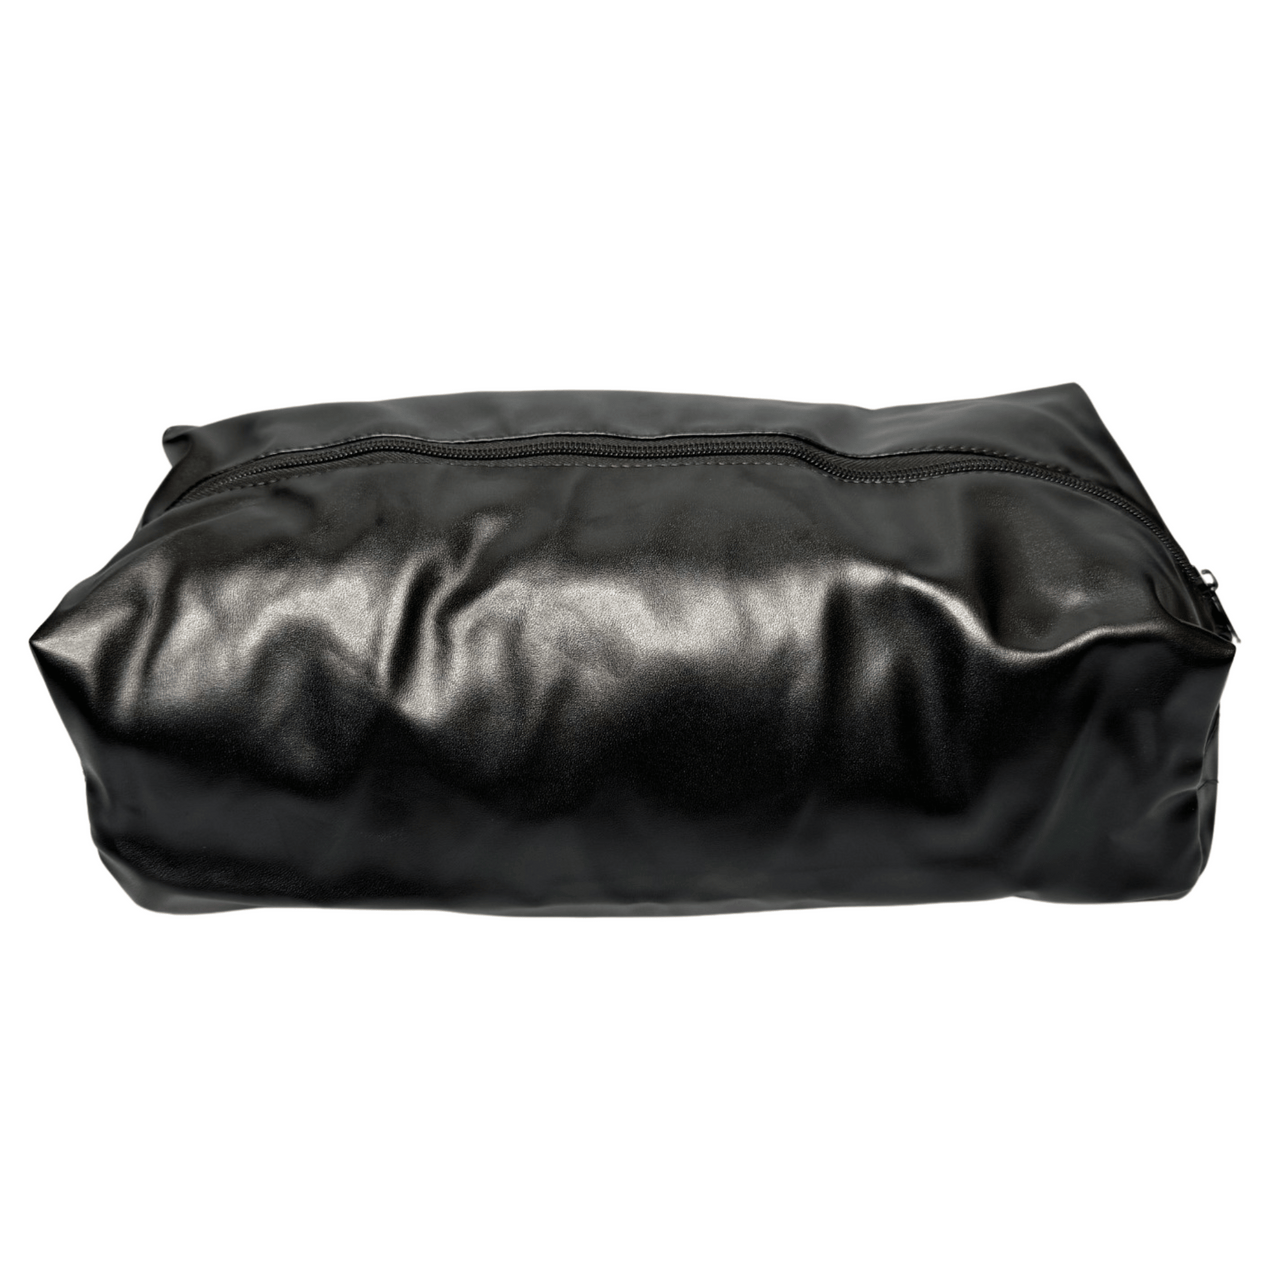 Chic Black PU Leather Toy Storage Bag – 13-Inch Discreet Organizer with Secure Zipper for Sensory Play Accessories